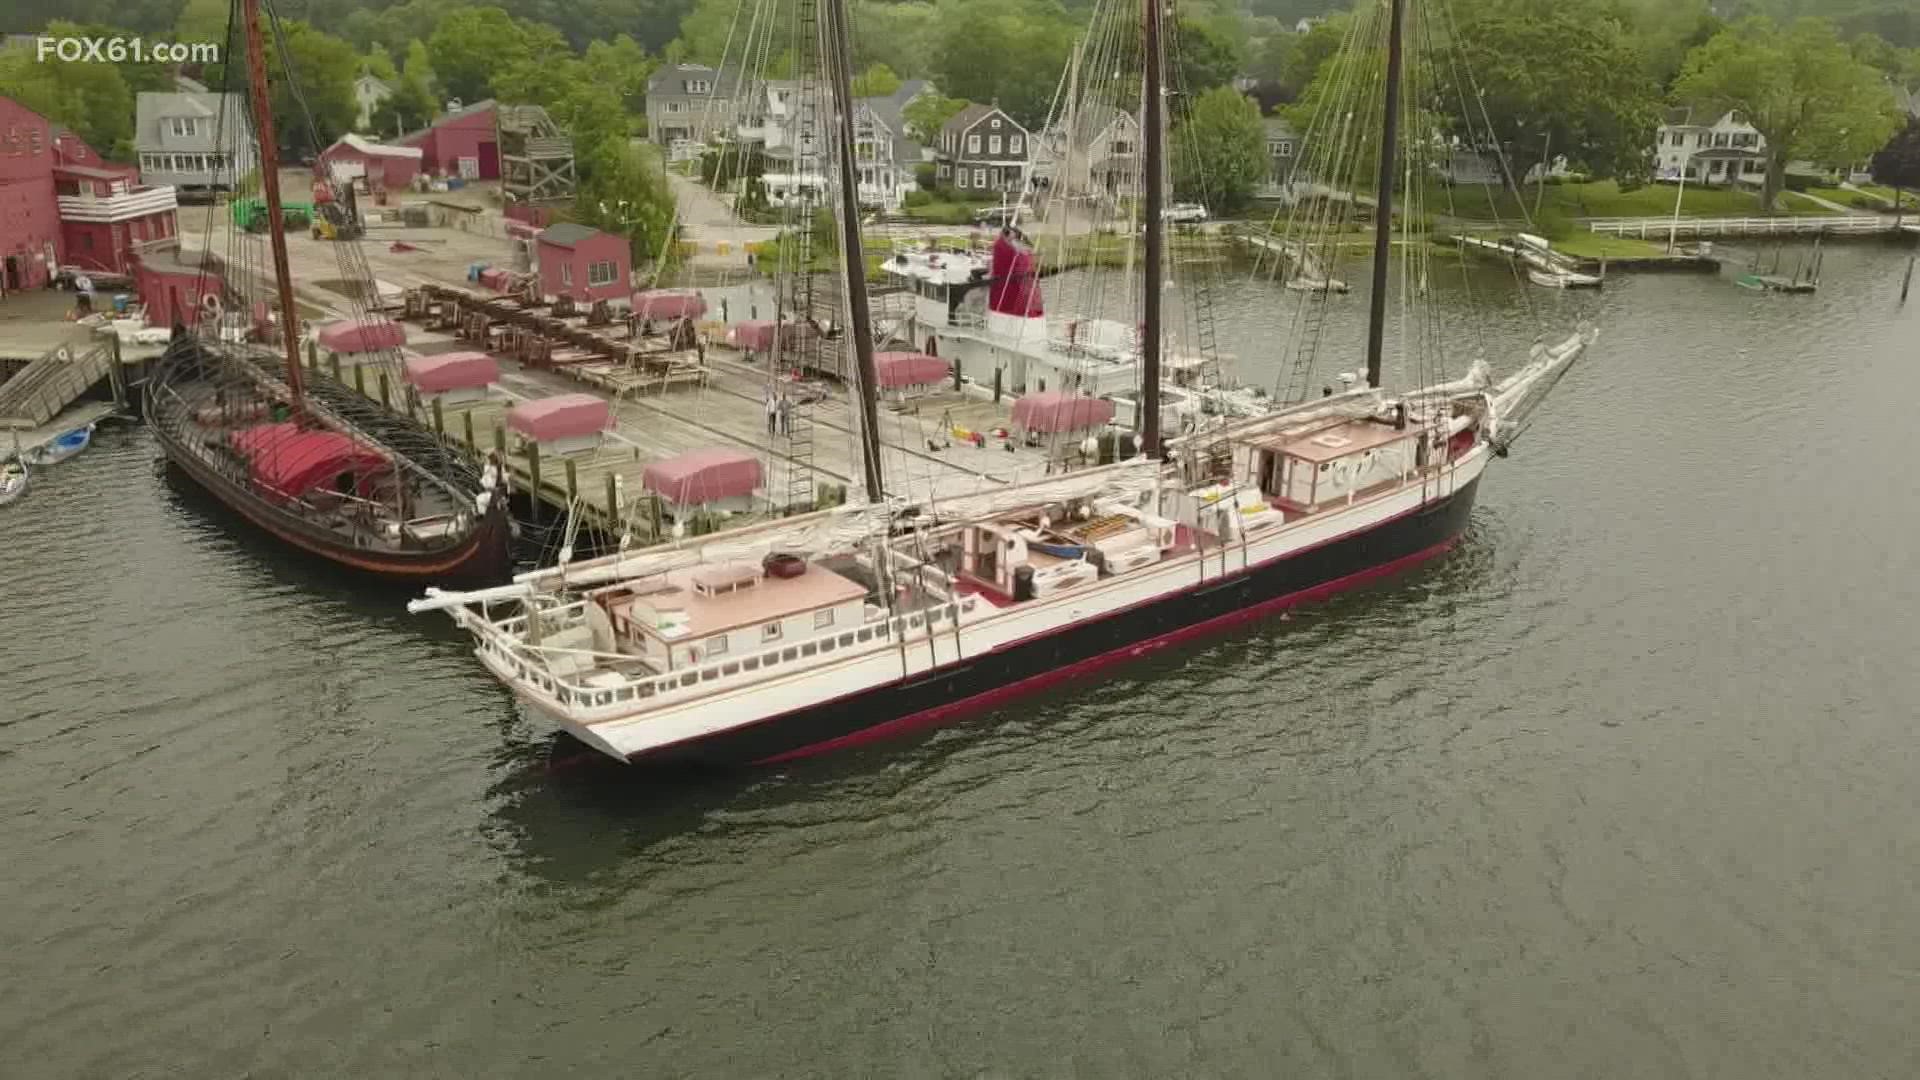 The schooner is the largest vessel the Mystic port has worked with.